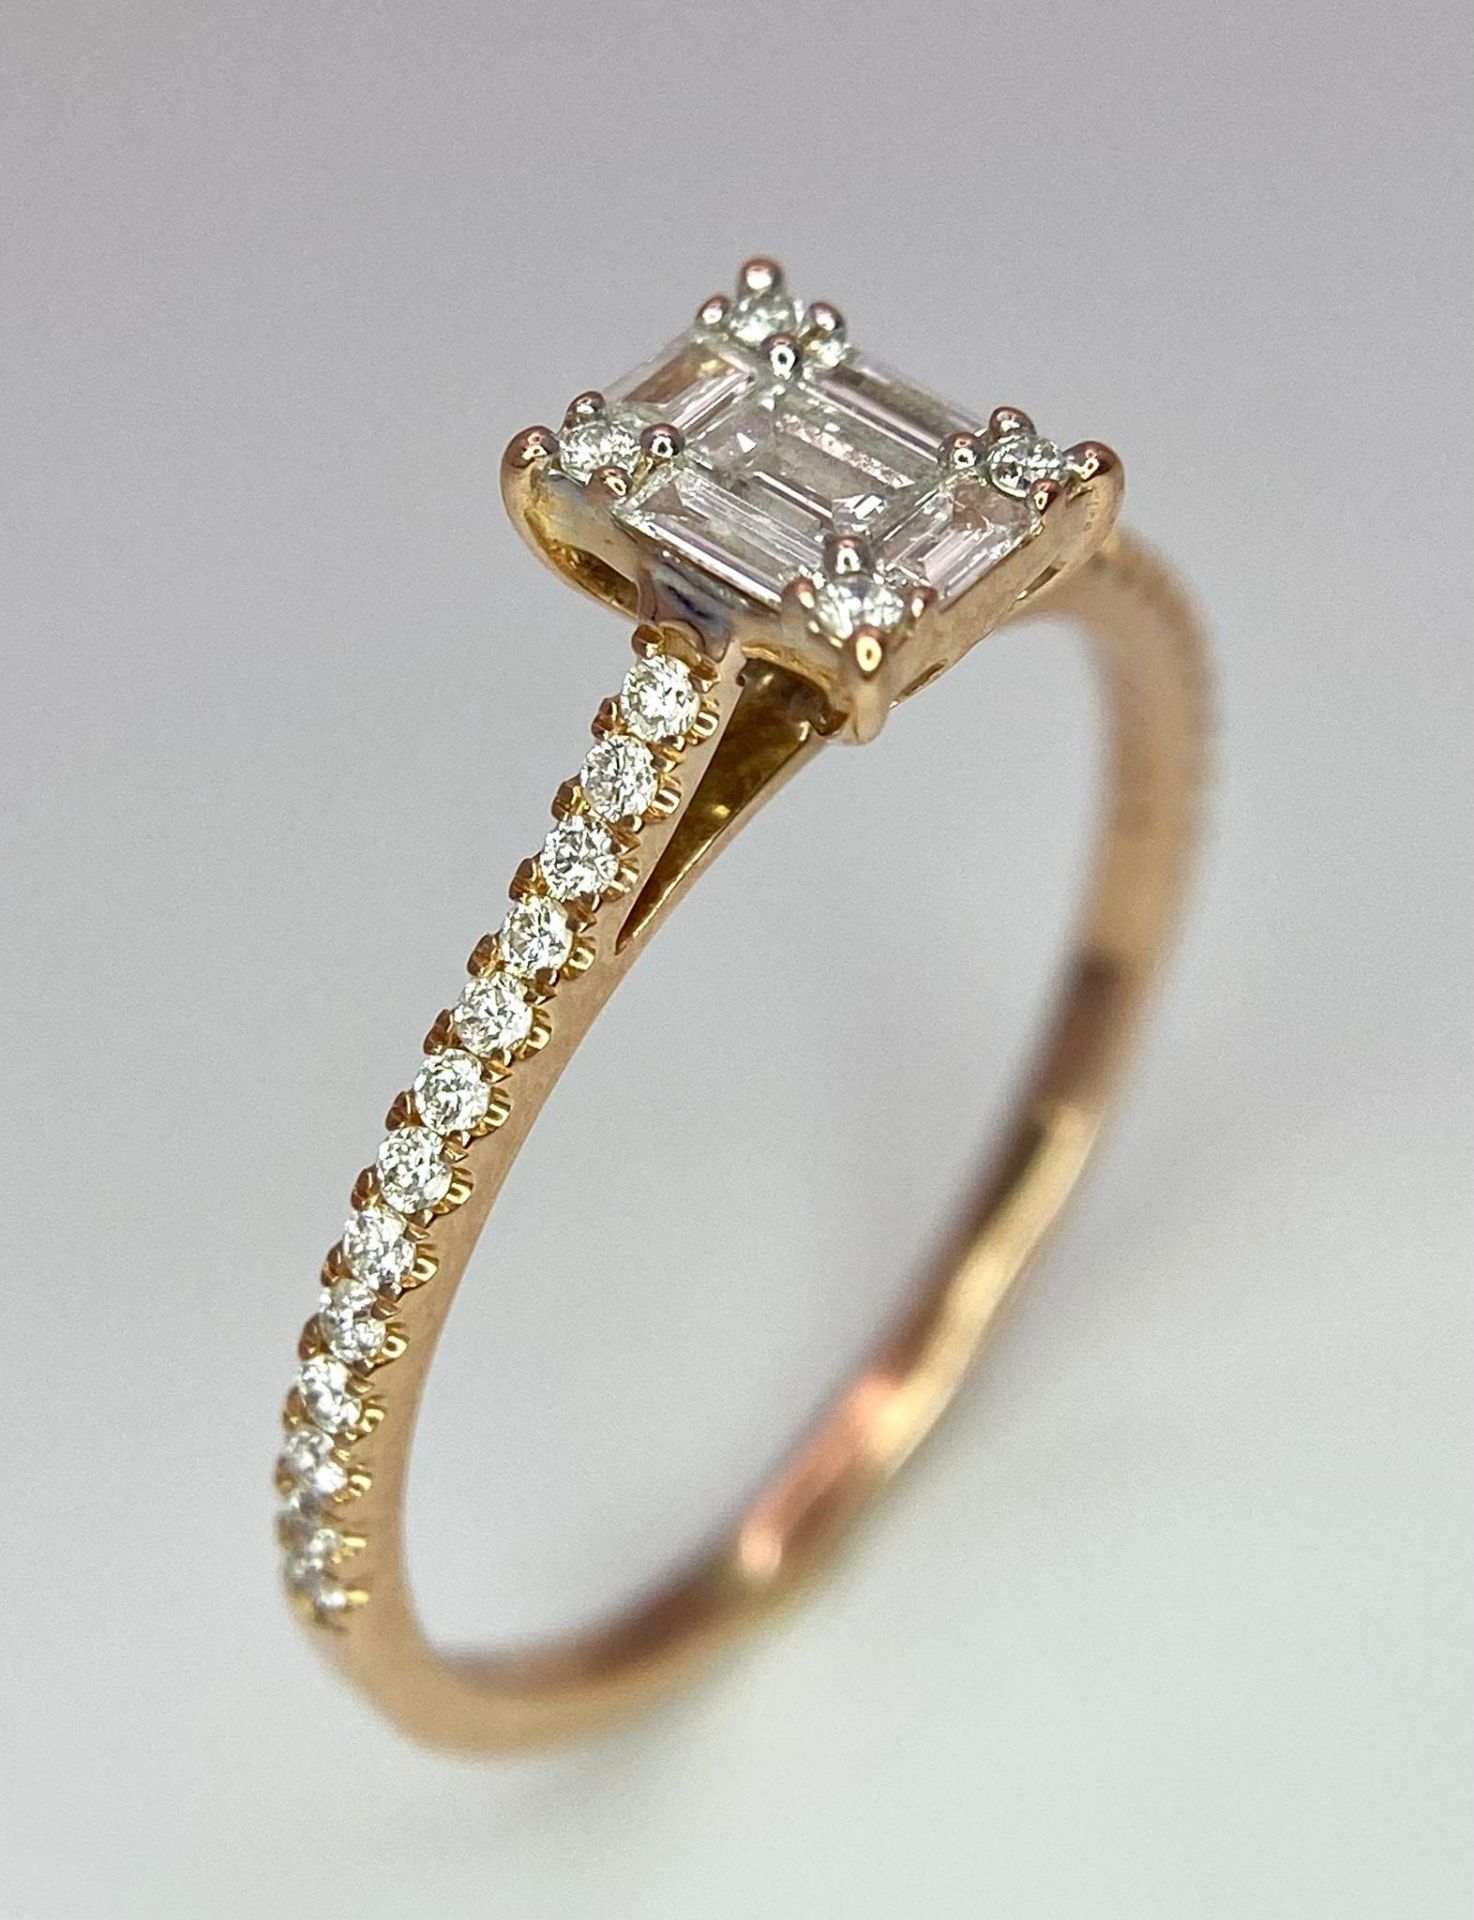 An 18 K rose gold ring with a square emerald cut diamond and more round cut diamonds on the - Image 5 of 8